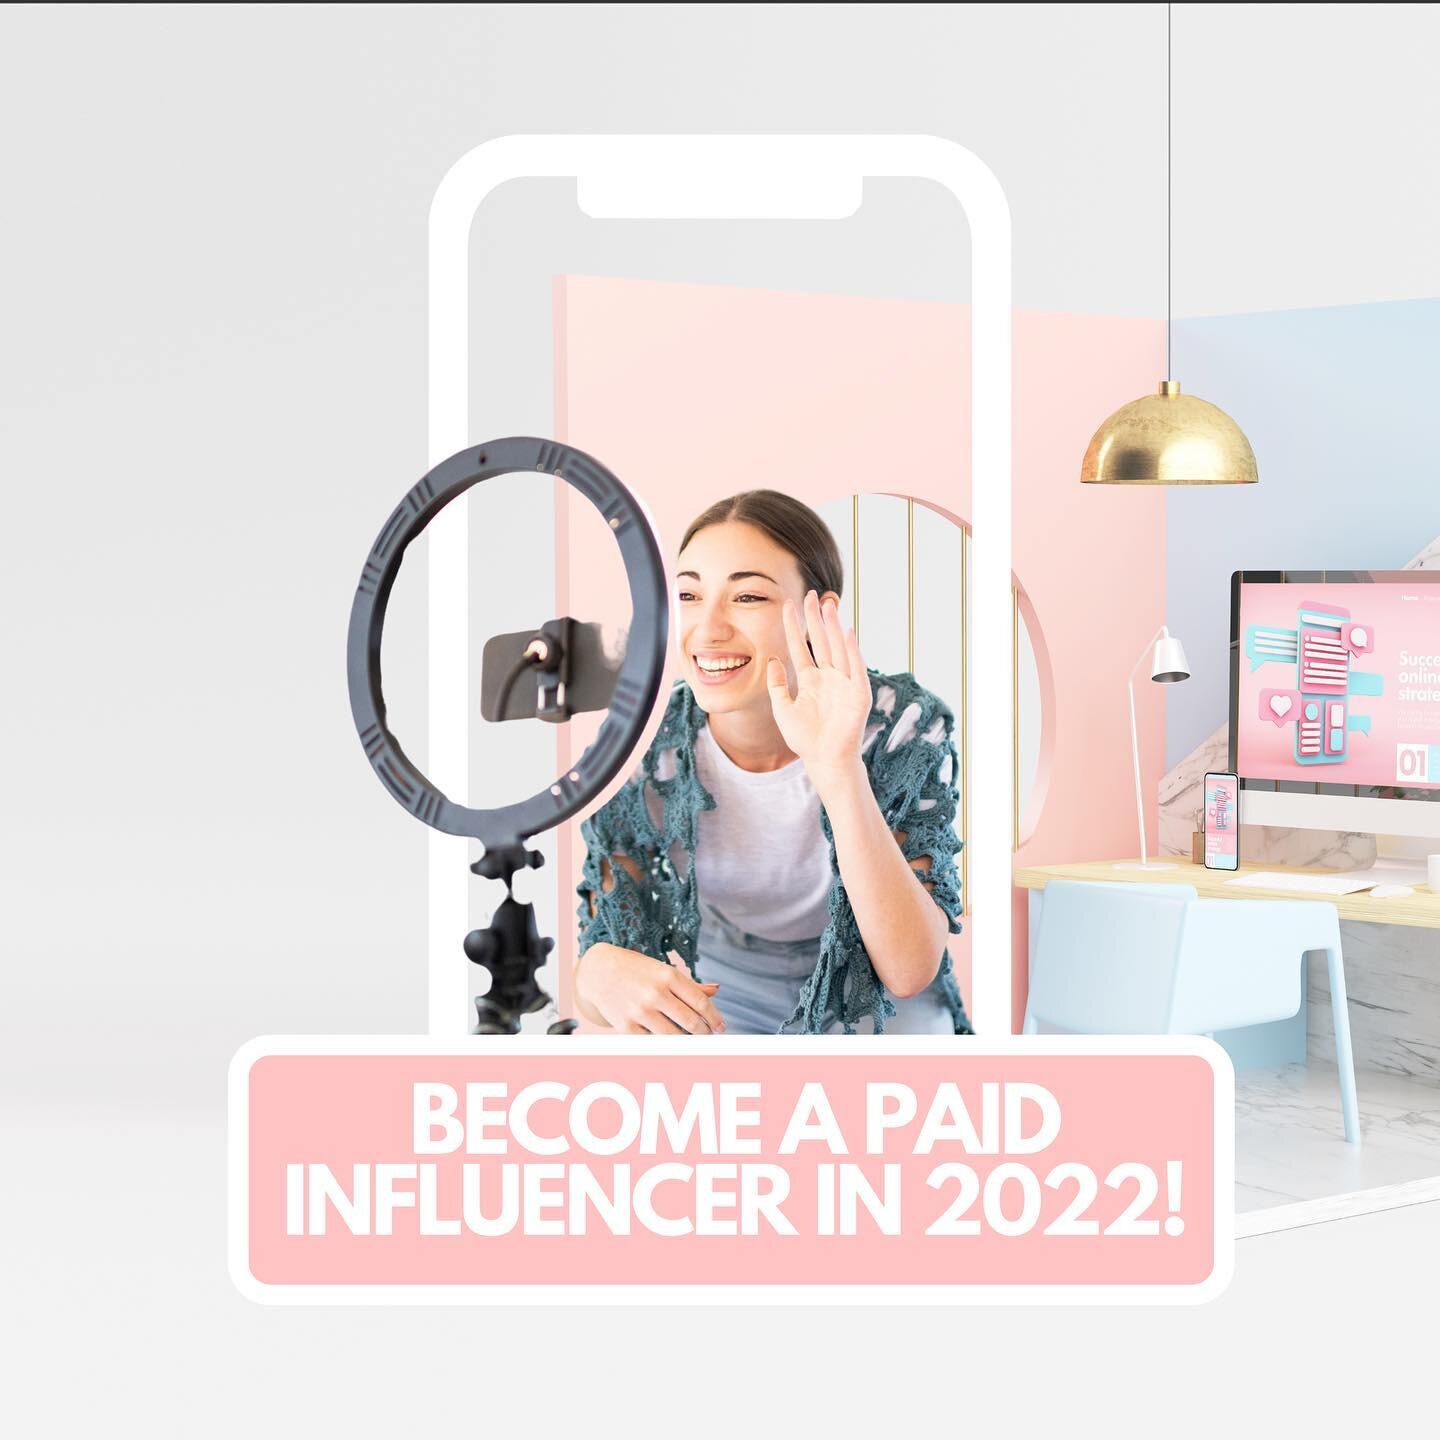 BECOME AN INFLUENCER IN 2022!!

Come join our network of talent &amp; unleash your potential doing what you love.

Open CASTING CALL!

✅No experience necessary
✅No large amounts of followers required 

You can play games, sing, dance, play an instrum